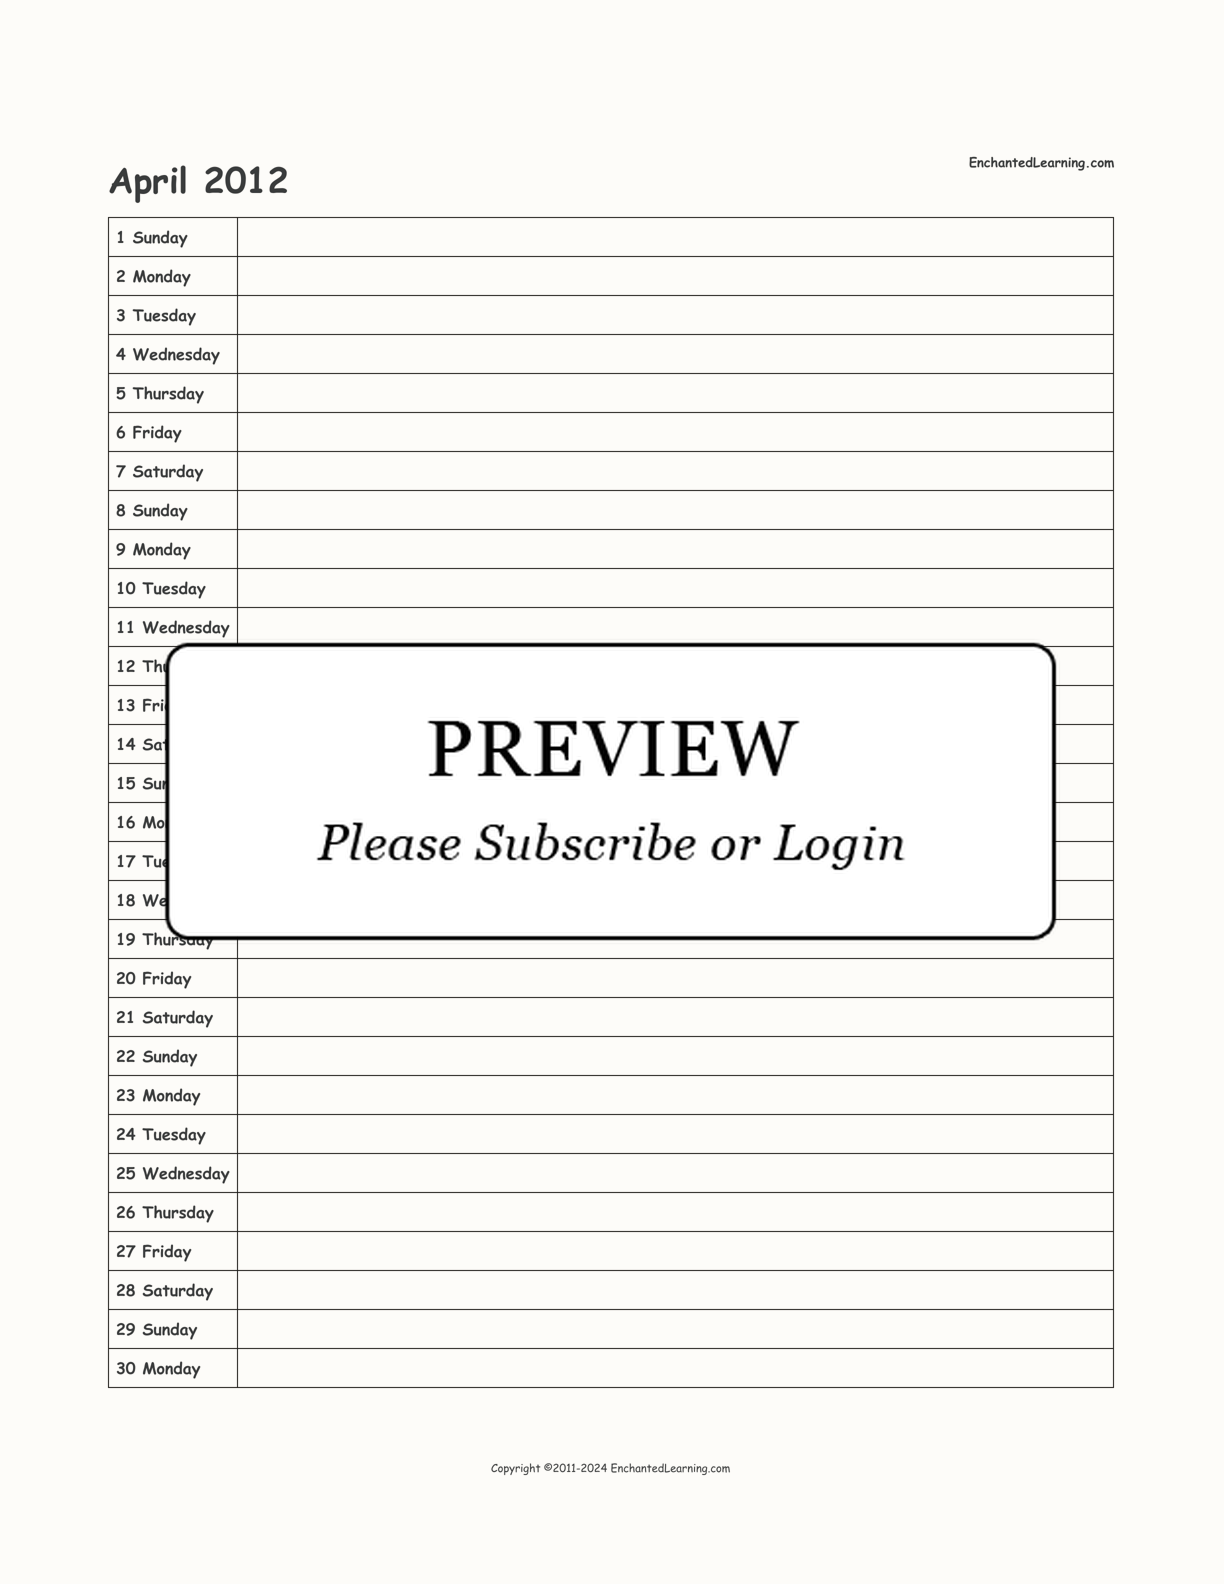 2012 Scheduling Calendar interactive printout page 4